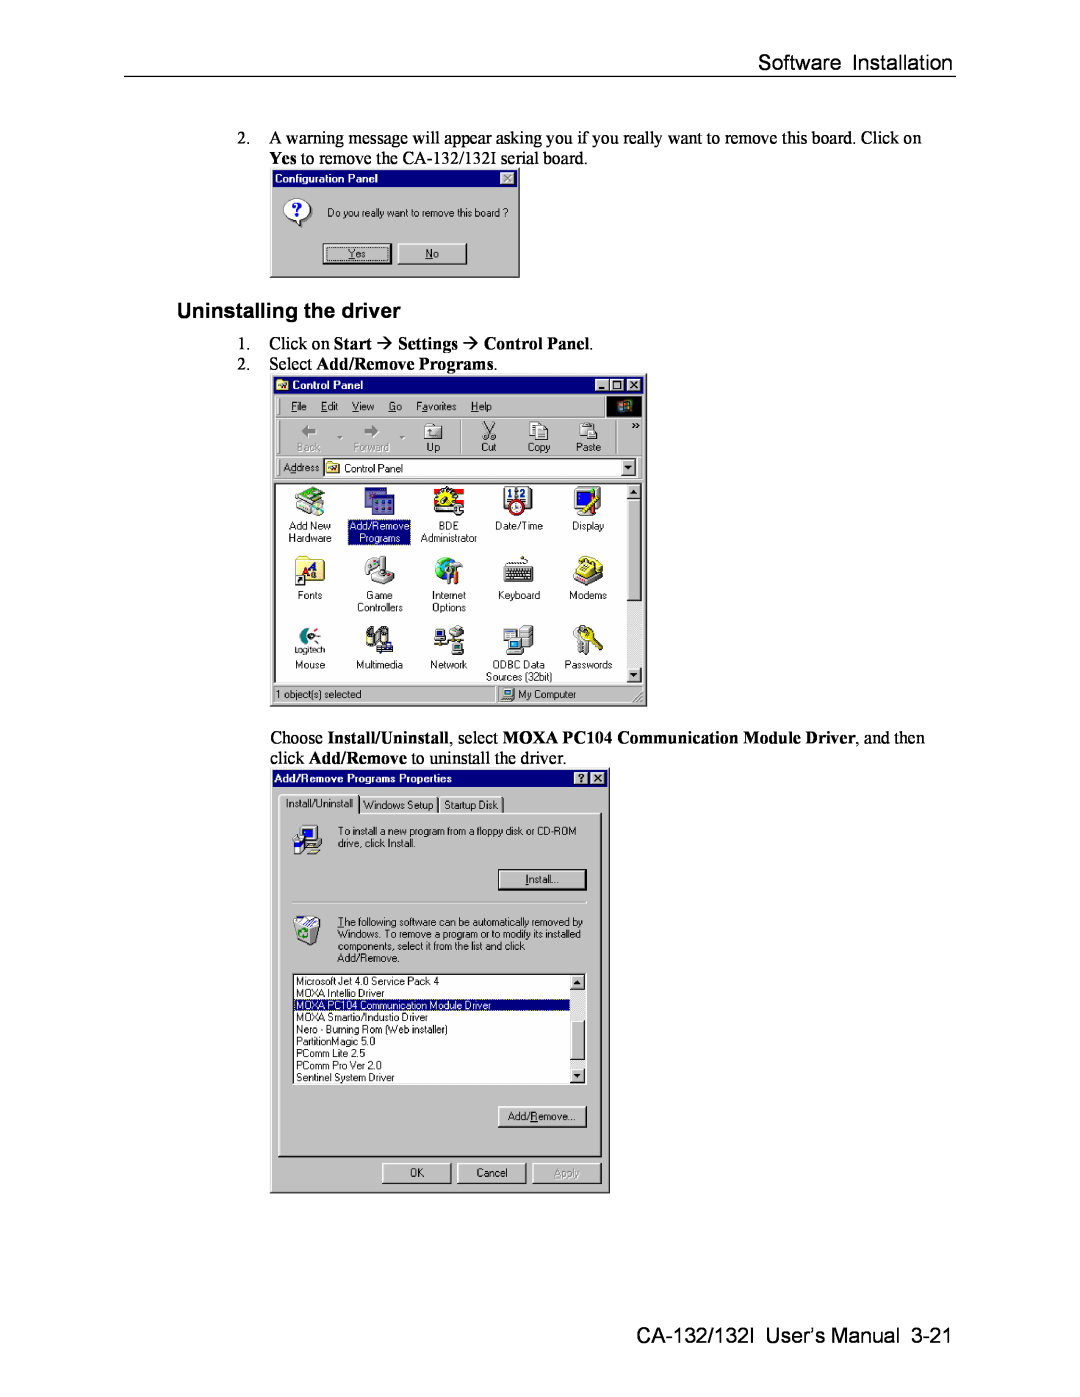 Moxa Technologies Uninstalling the driver, Software Installation, CA-132/132I User’s Manual, Select Add/Remove Programs 